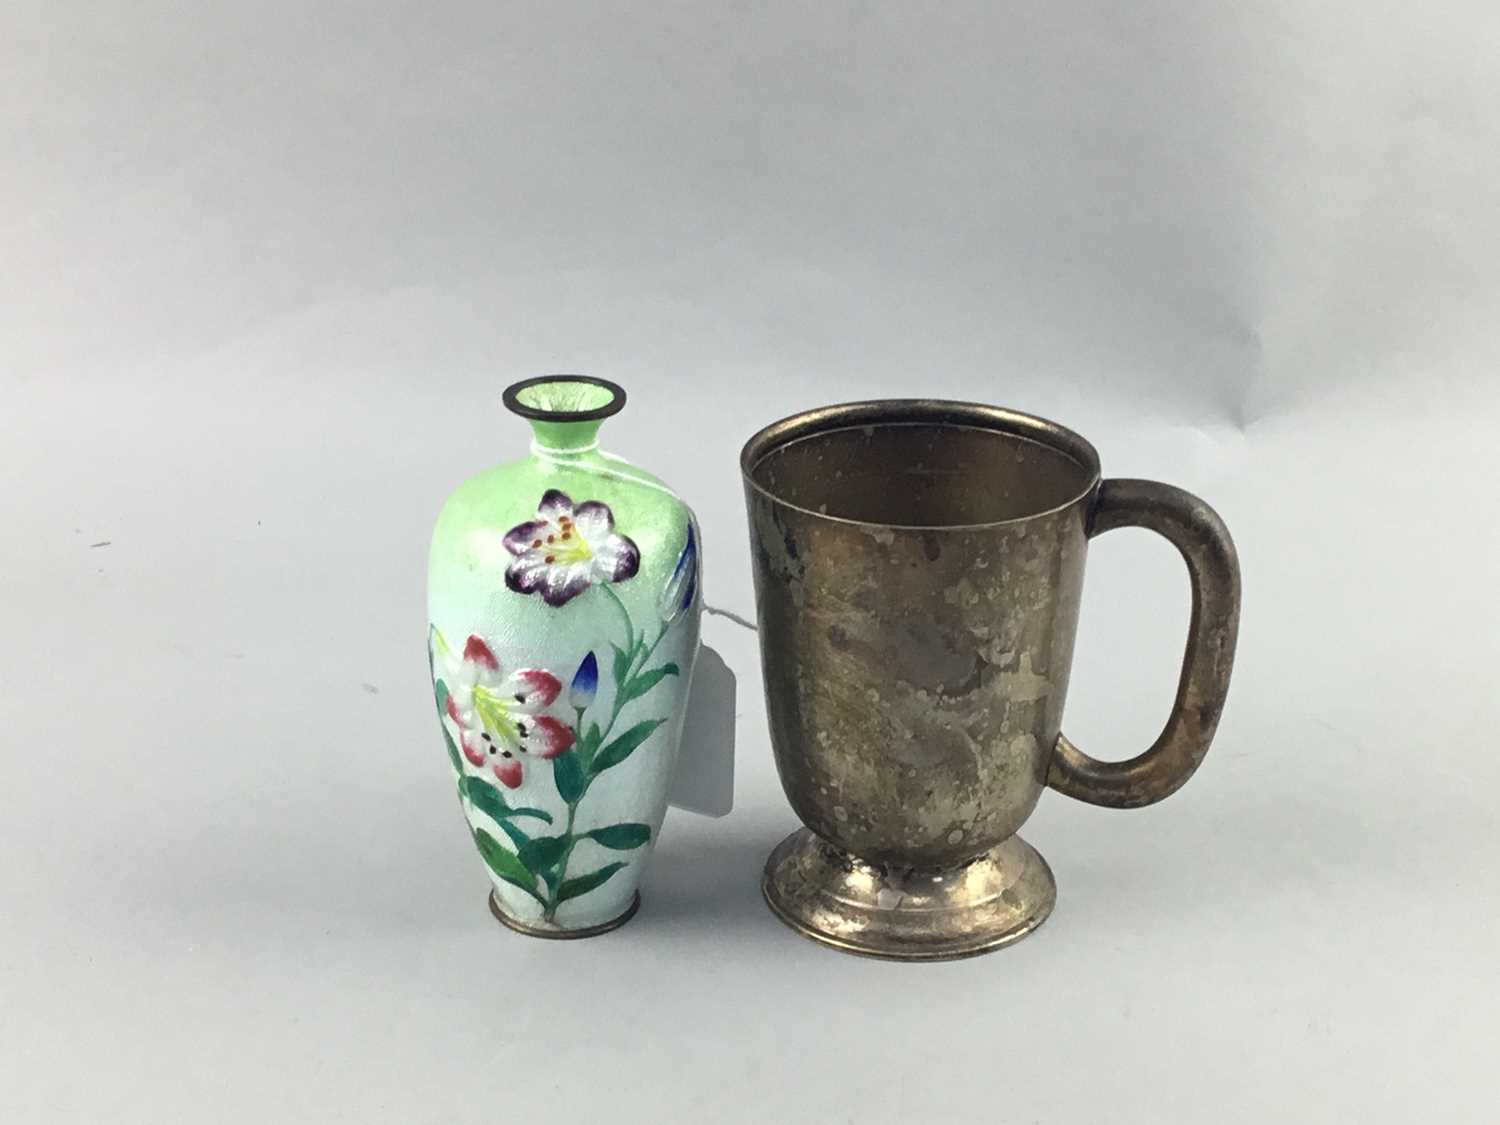 Lot 80 - A CHINESE CLOISONNE VASE, PAIR OF EWERS AND A SHIP IN A BOTTLE